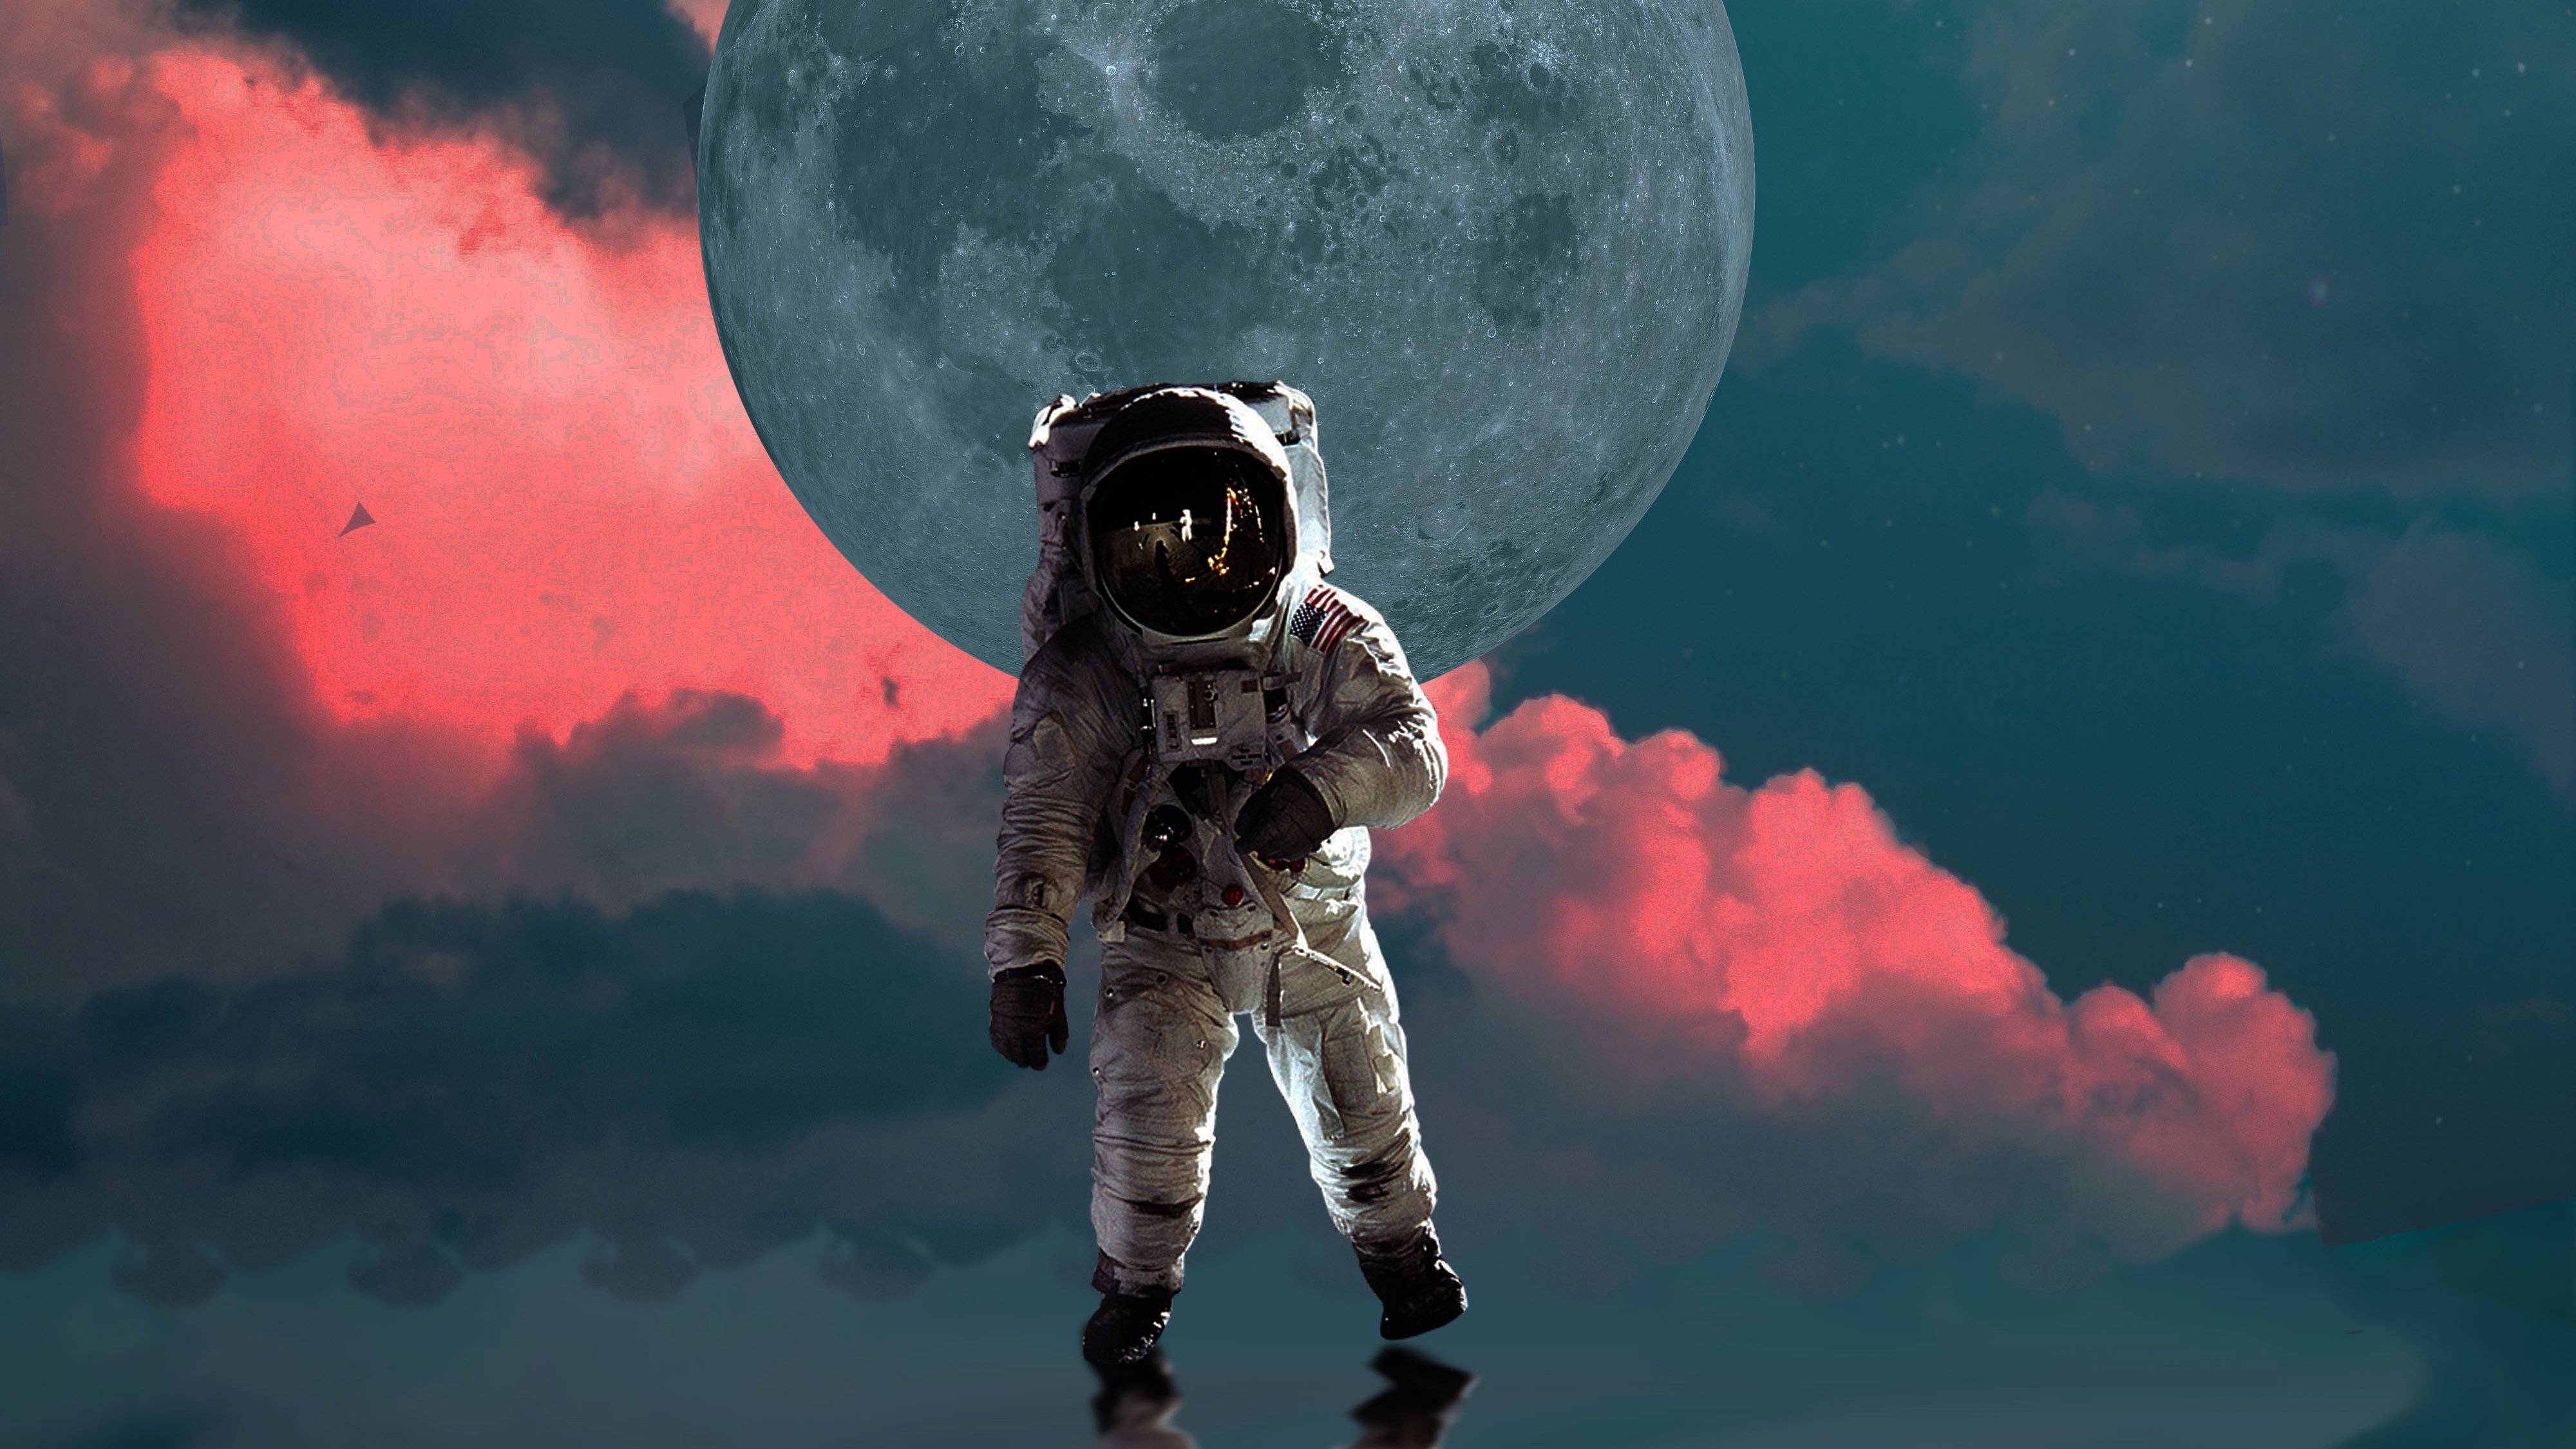 4k Astronaut Wallpapers and Backgrounds in 2023